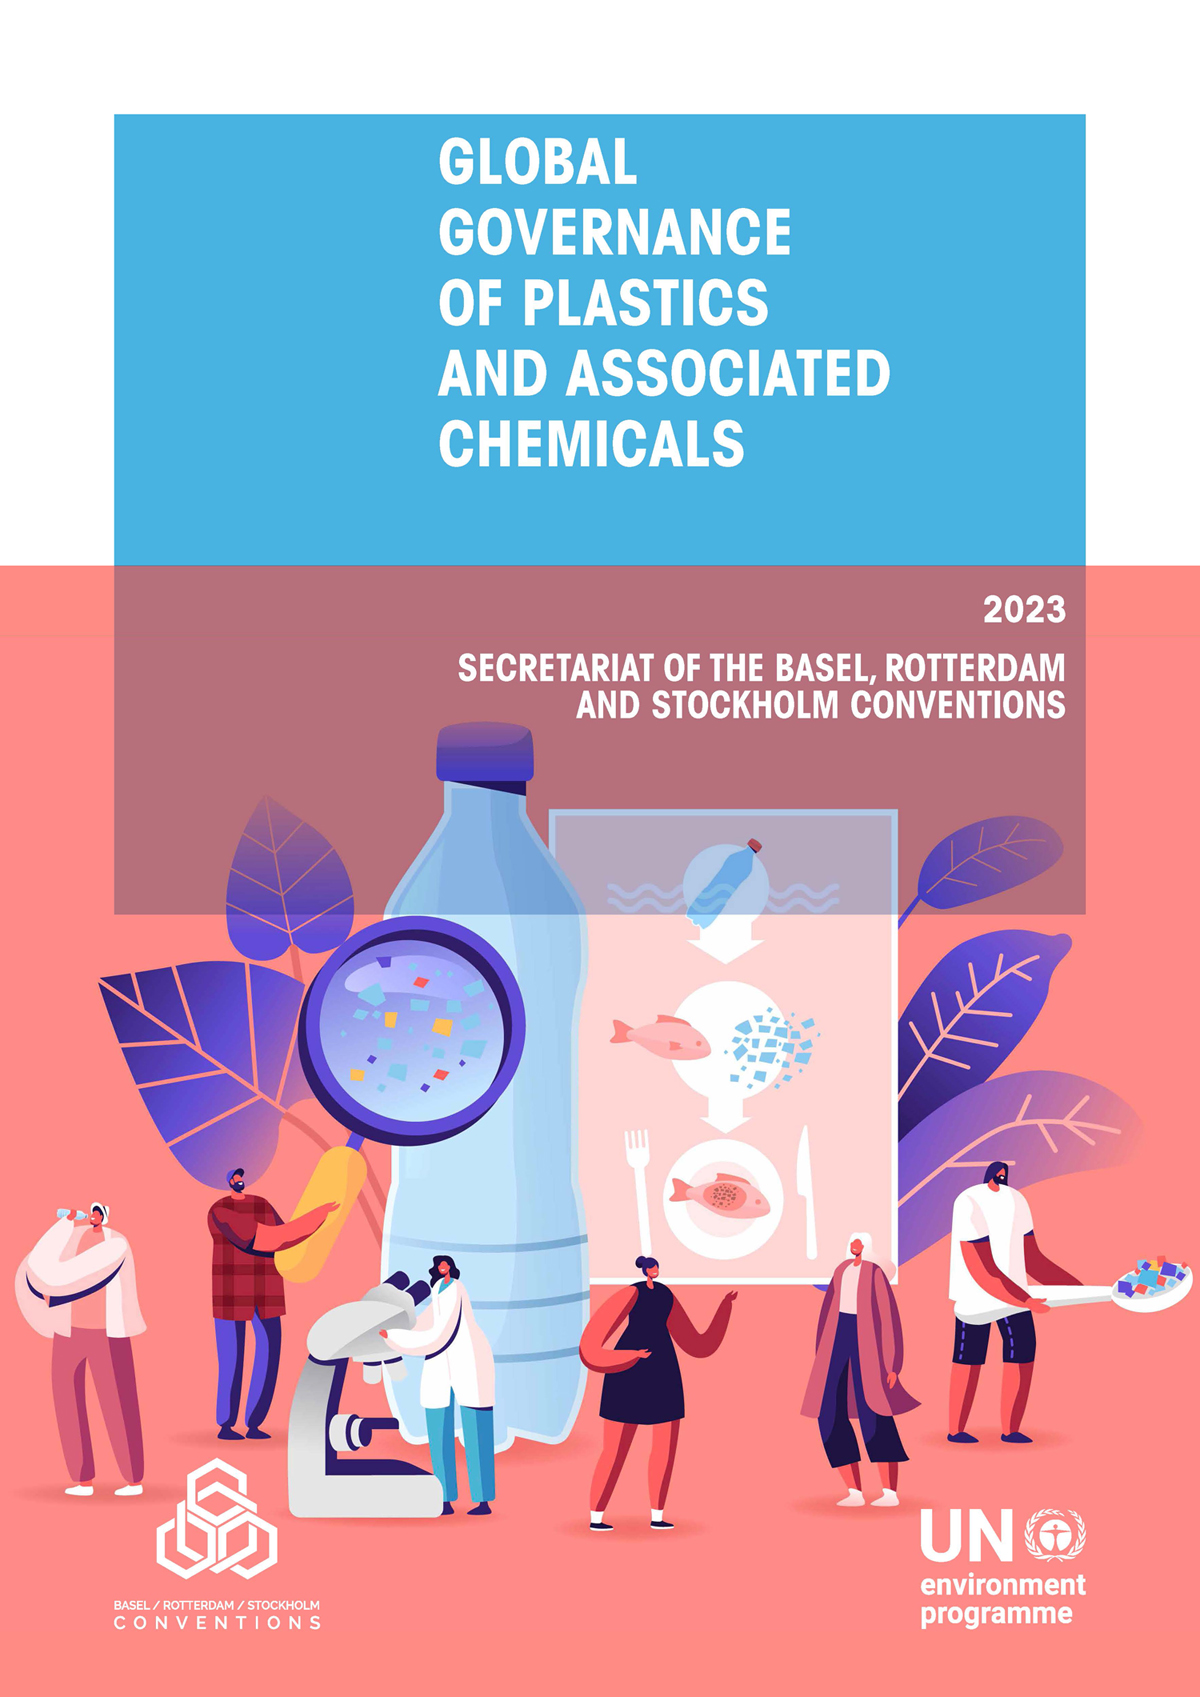 Global governance of plastics and associated chemicals